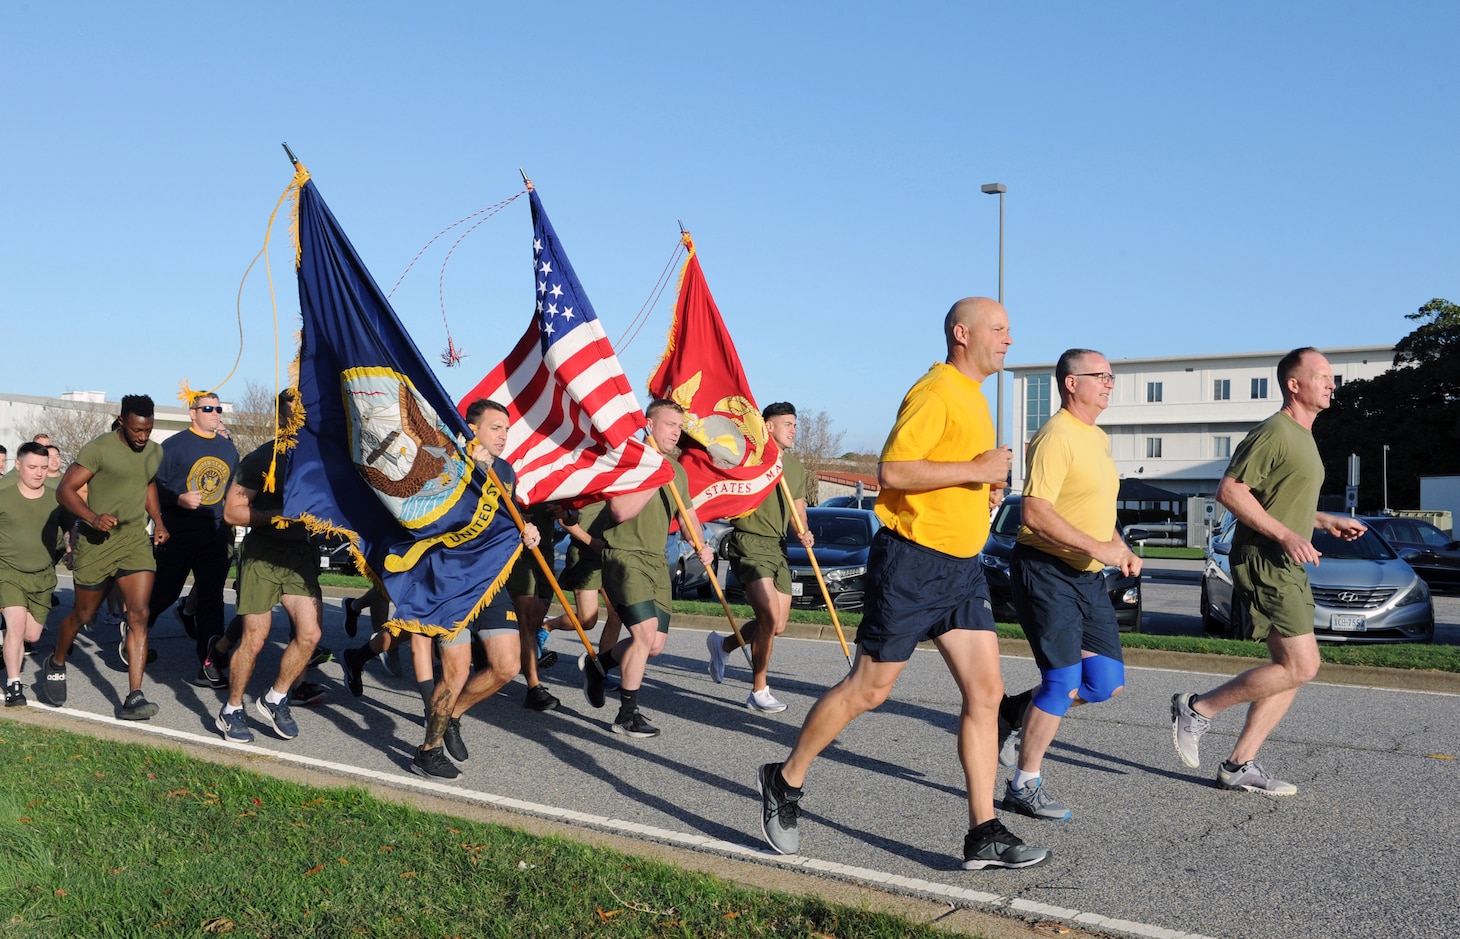 In celebration of the United States Marine Corps' 247th birthday, Marines, Sailors, and civilians of Expeditionary Warfare Training Group, Atlantic (EWTGLANT) participated in a 247-mile run.